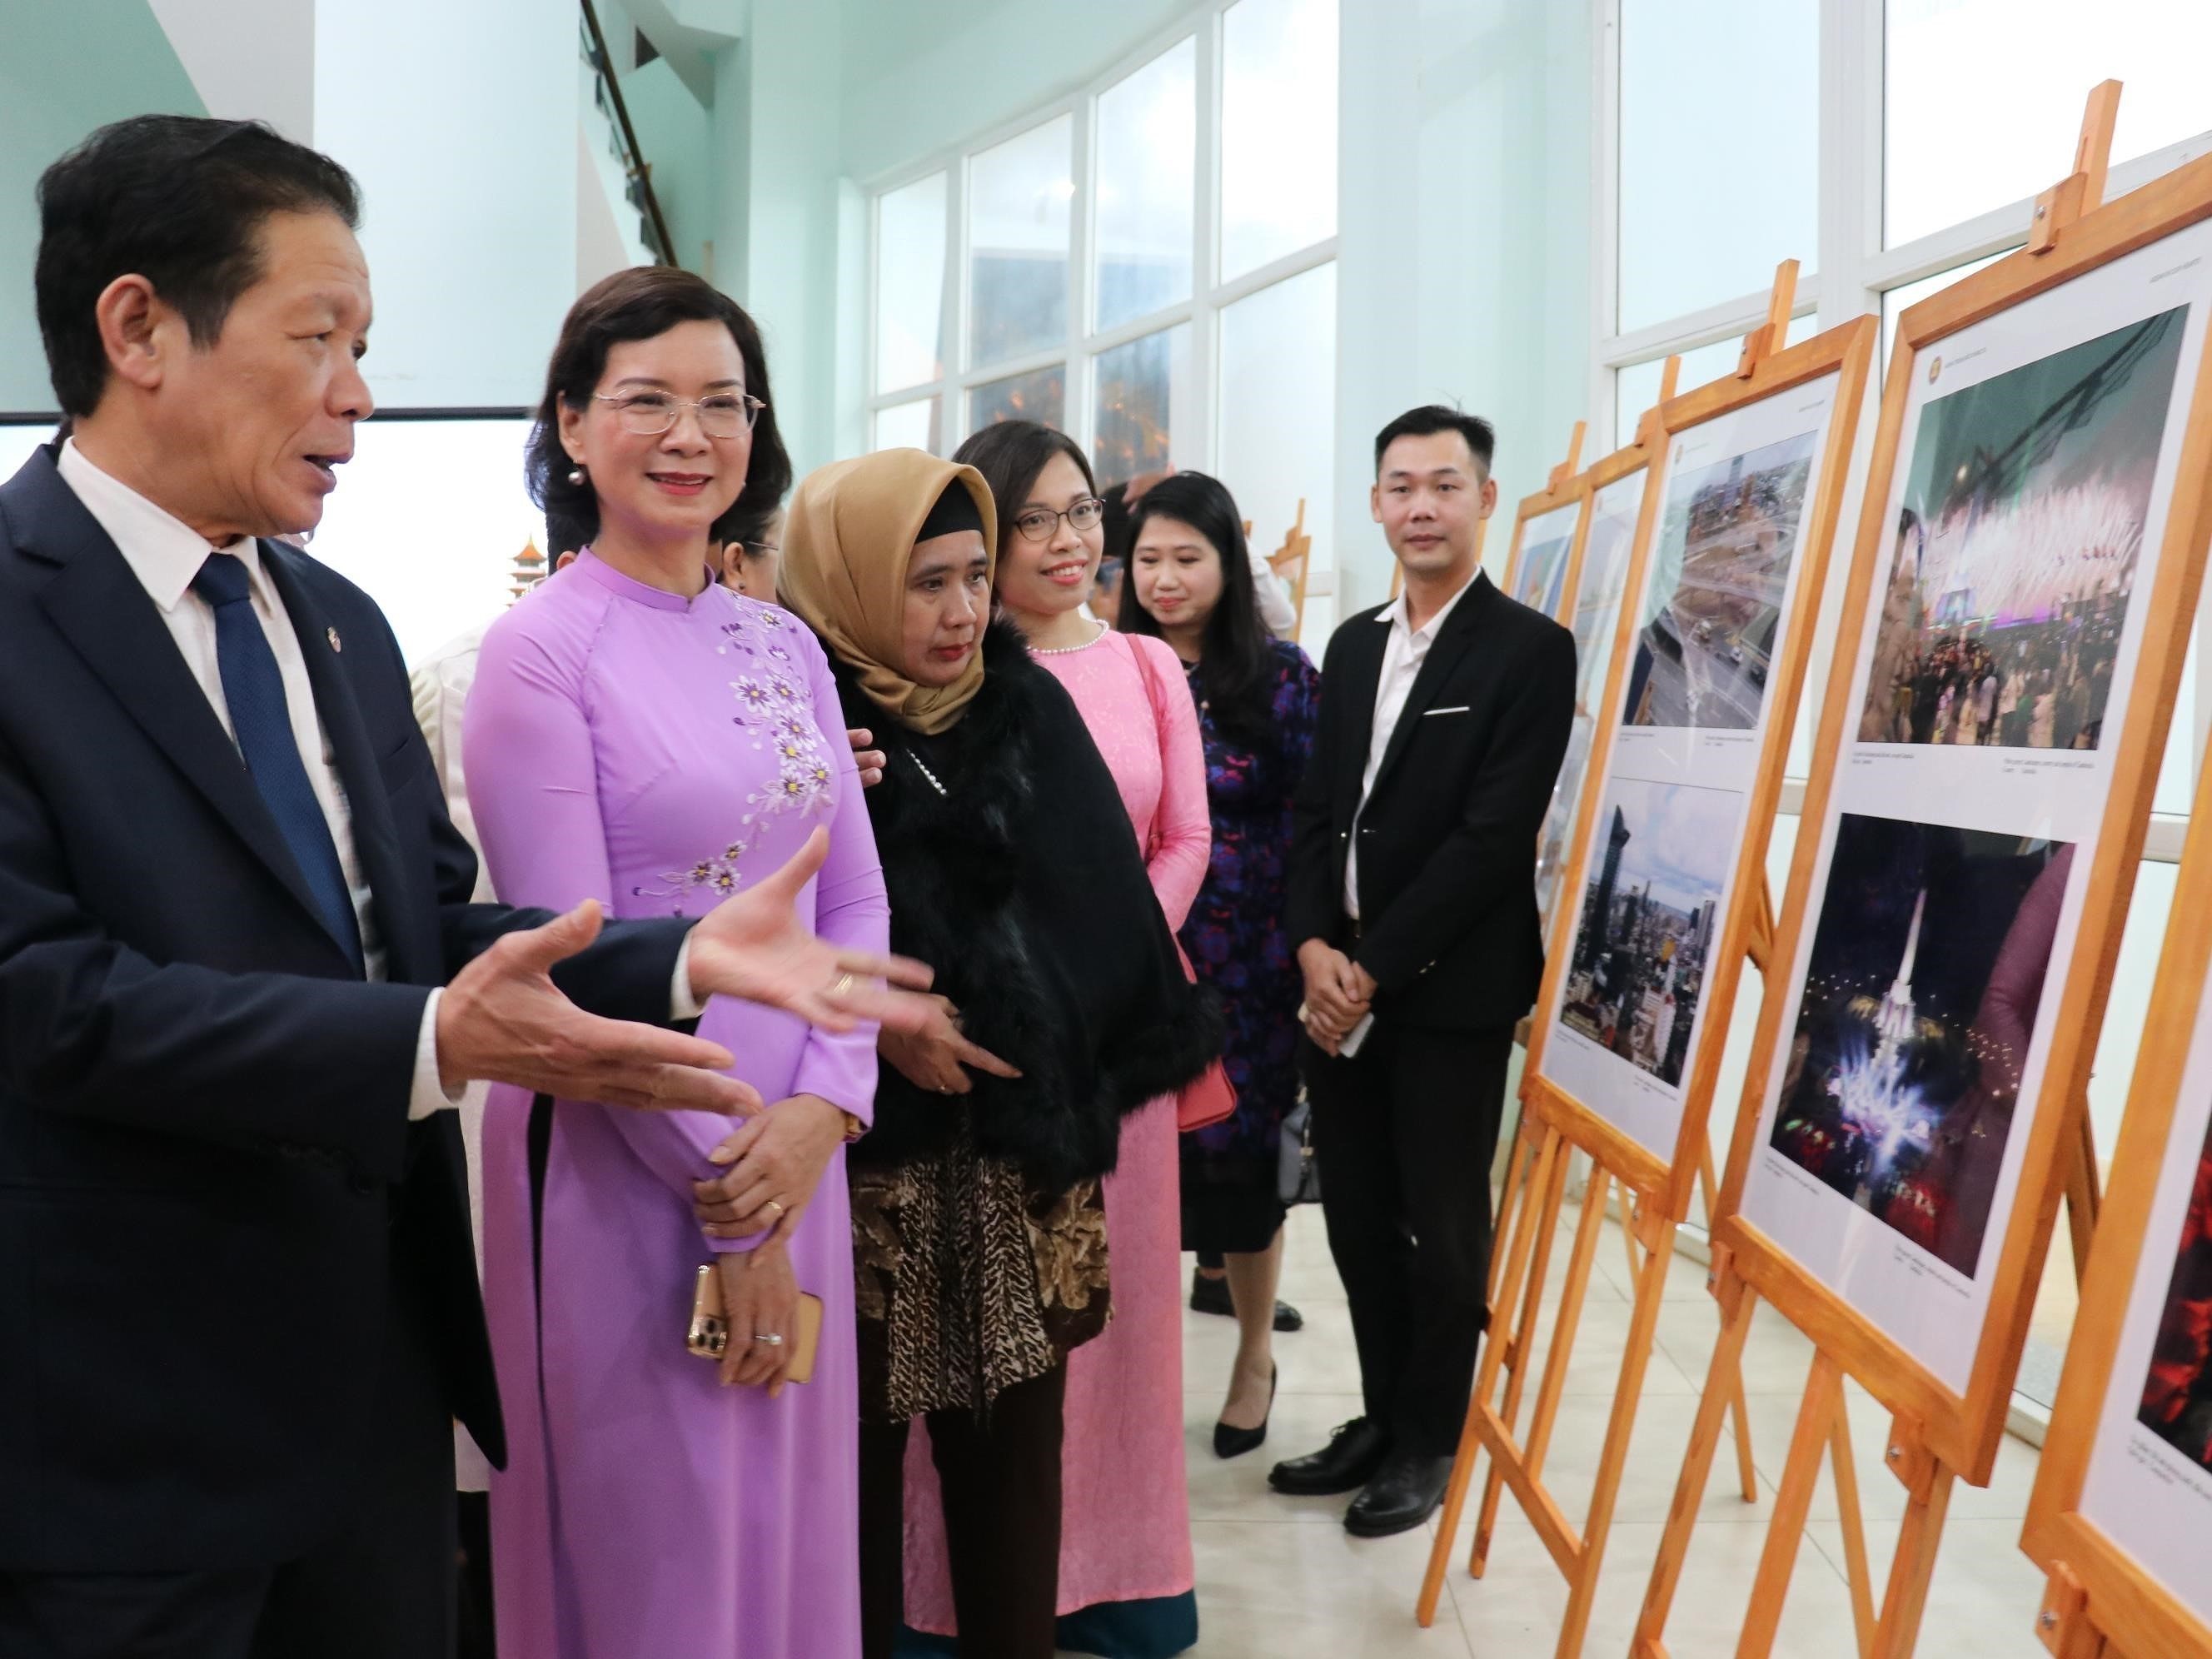 Exhibition showcases photos and films of ASEAN Community hinh anh 2